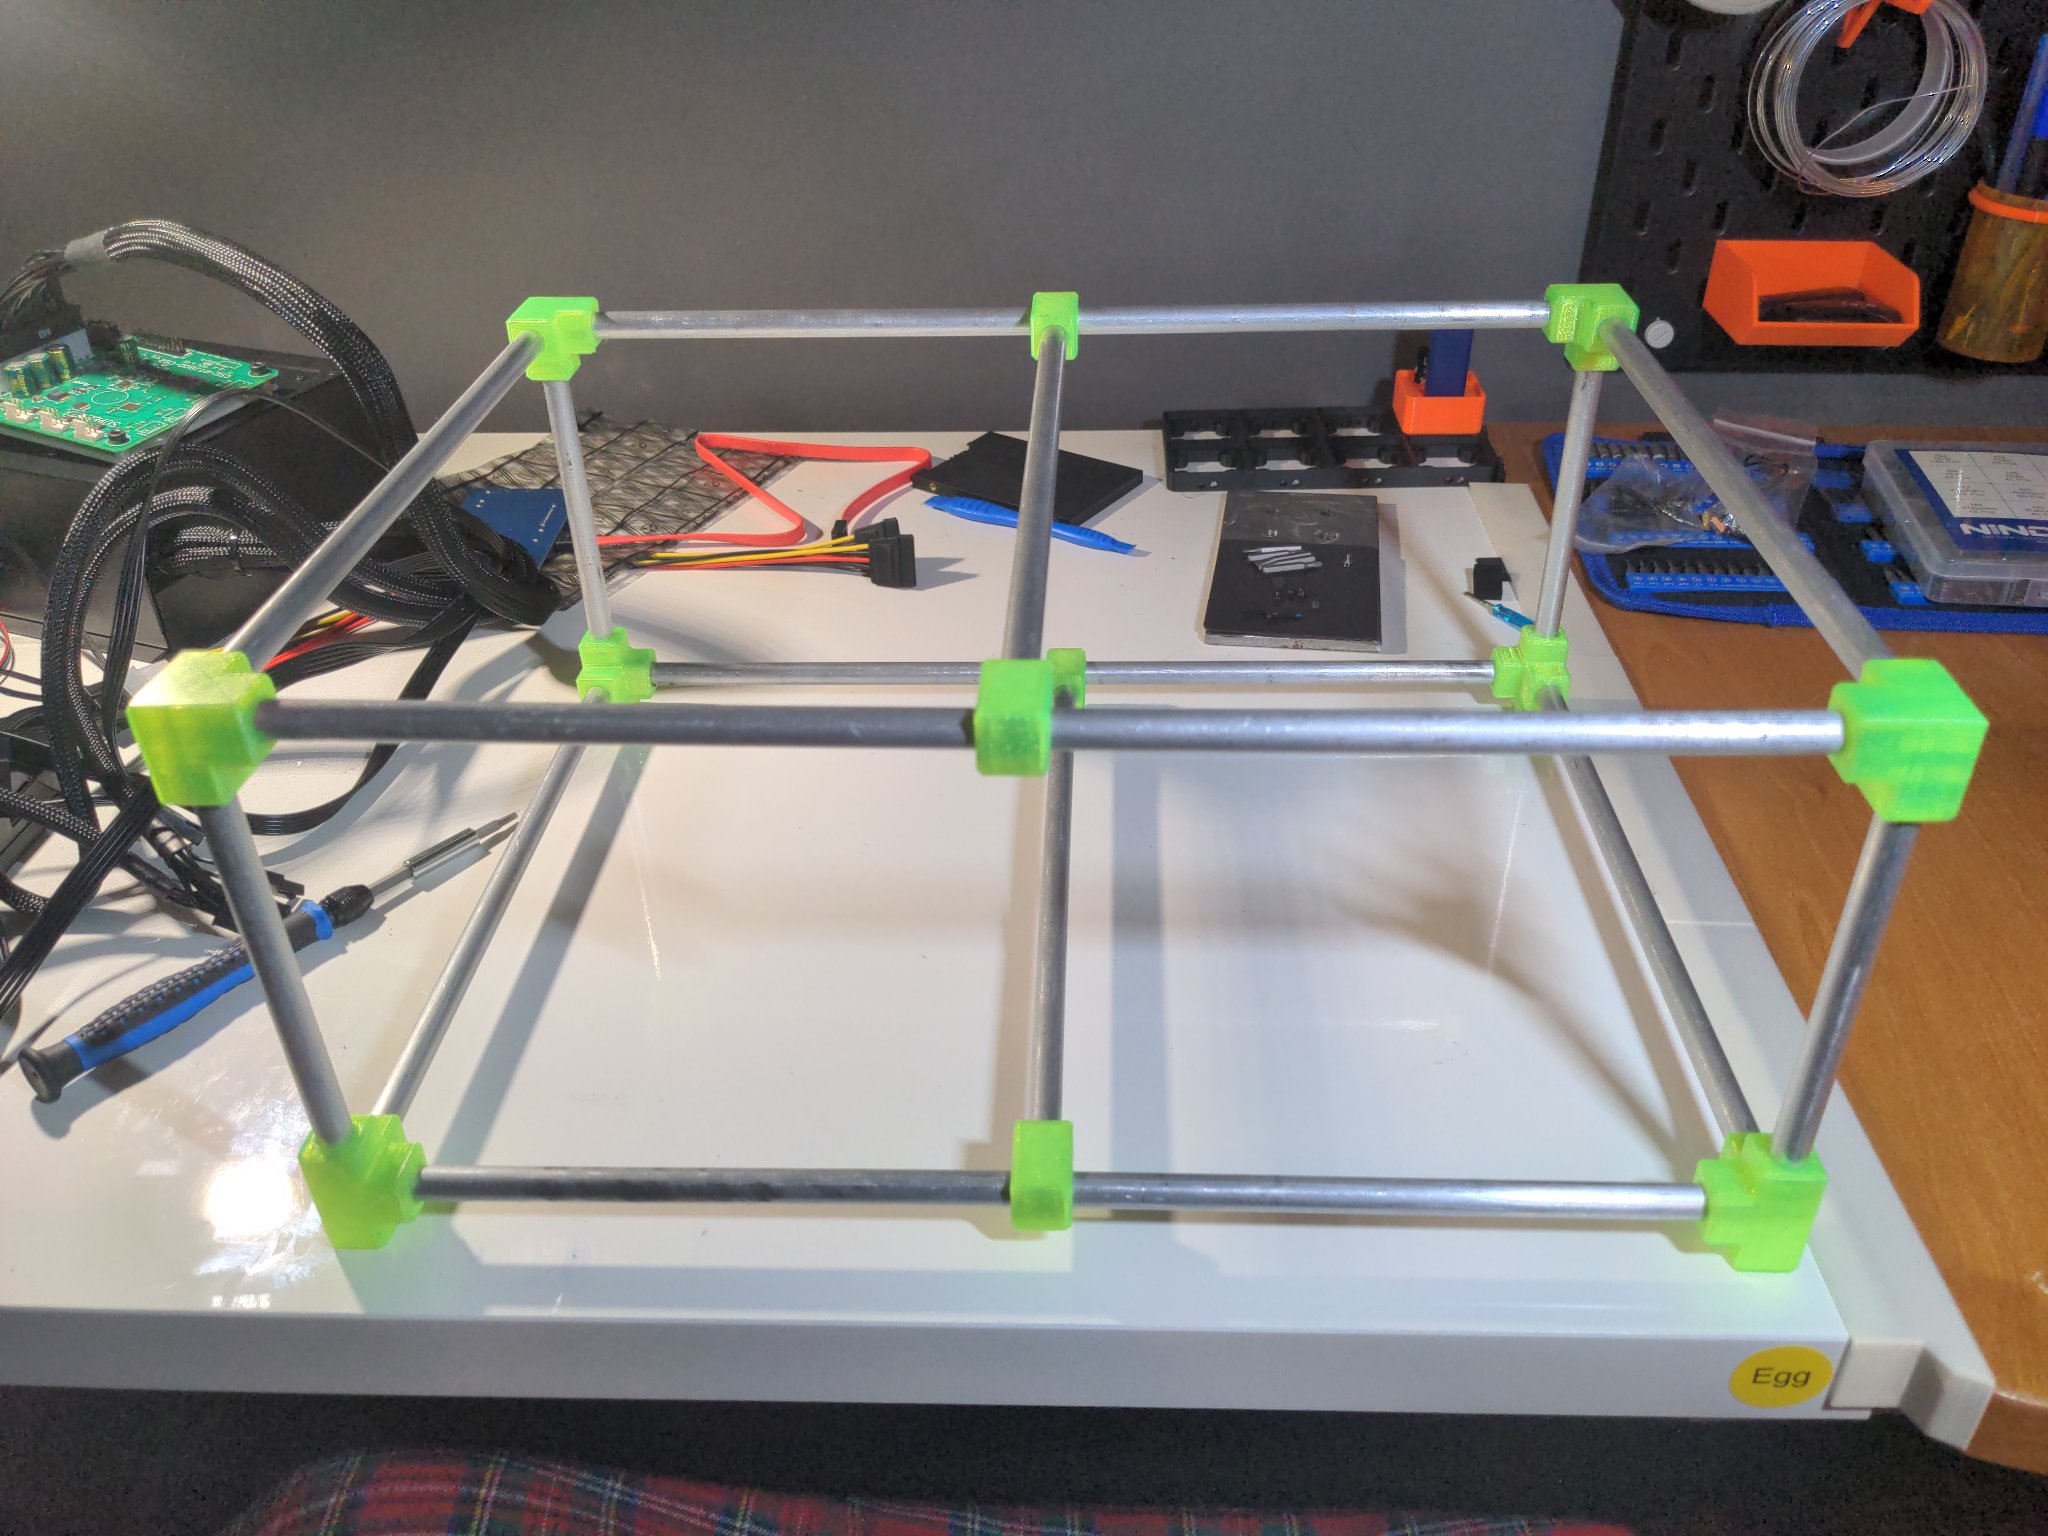 A frame made of aluminum rods press-fit into custom 3d-printed joints